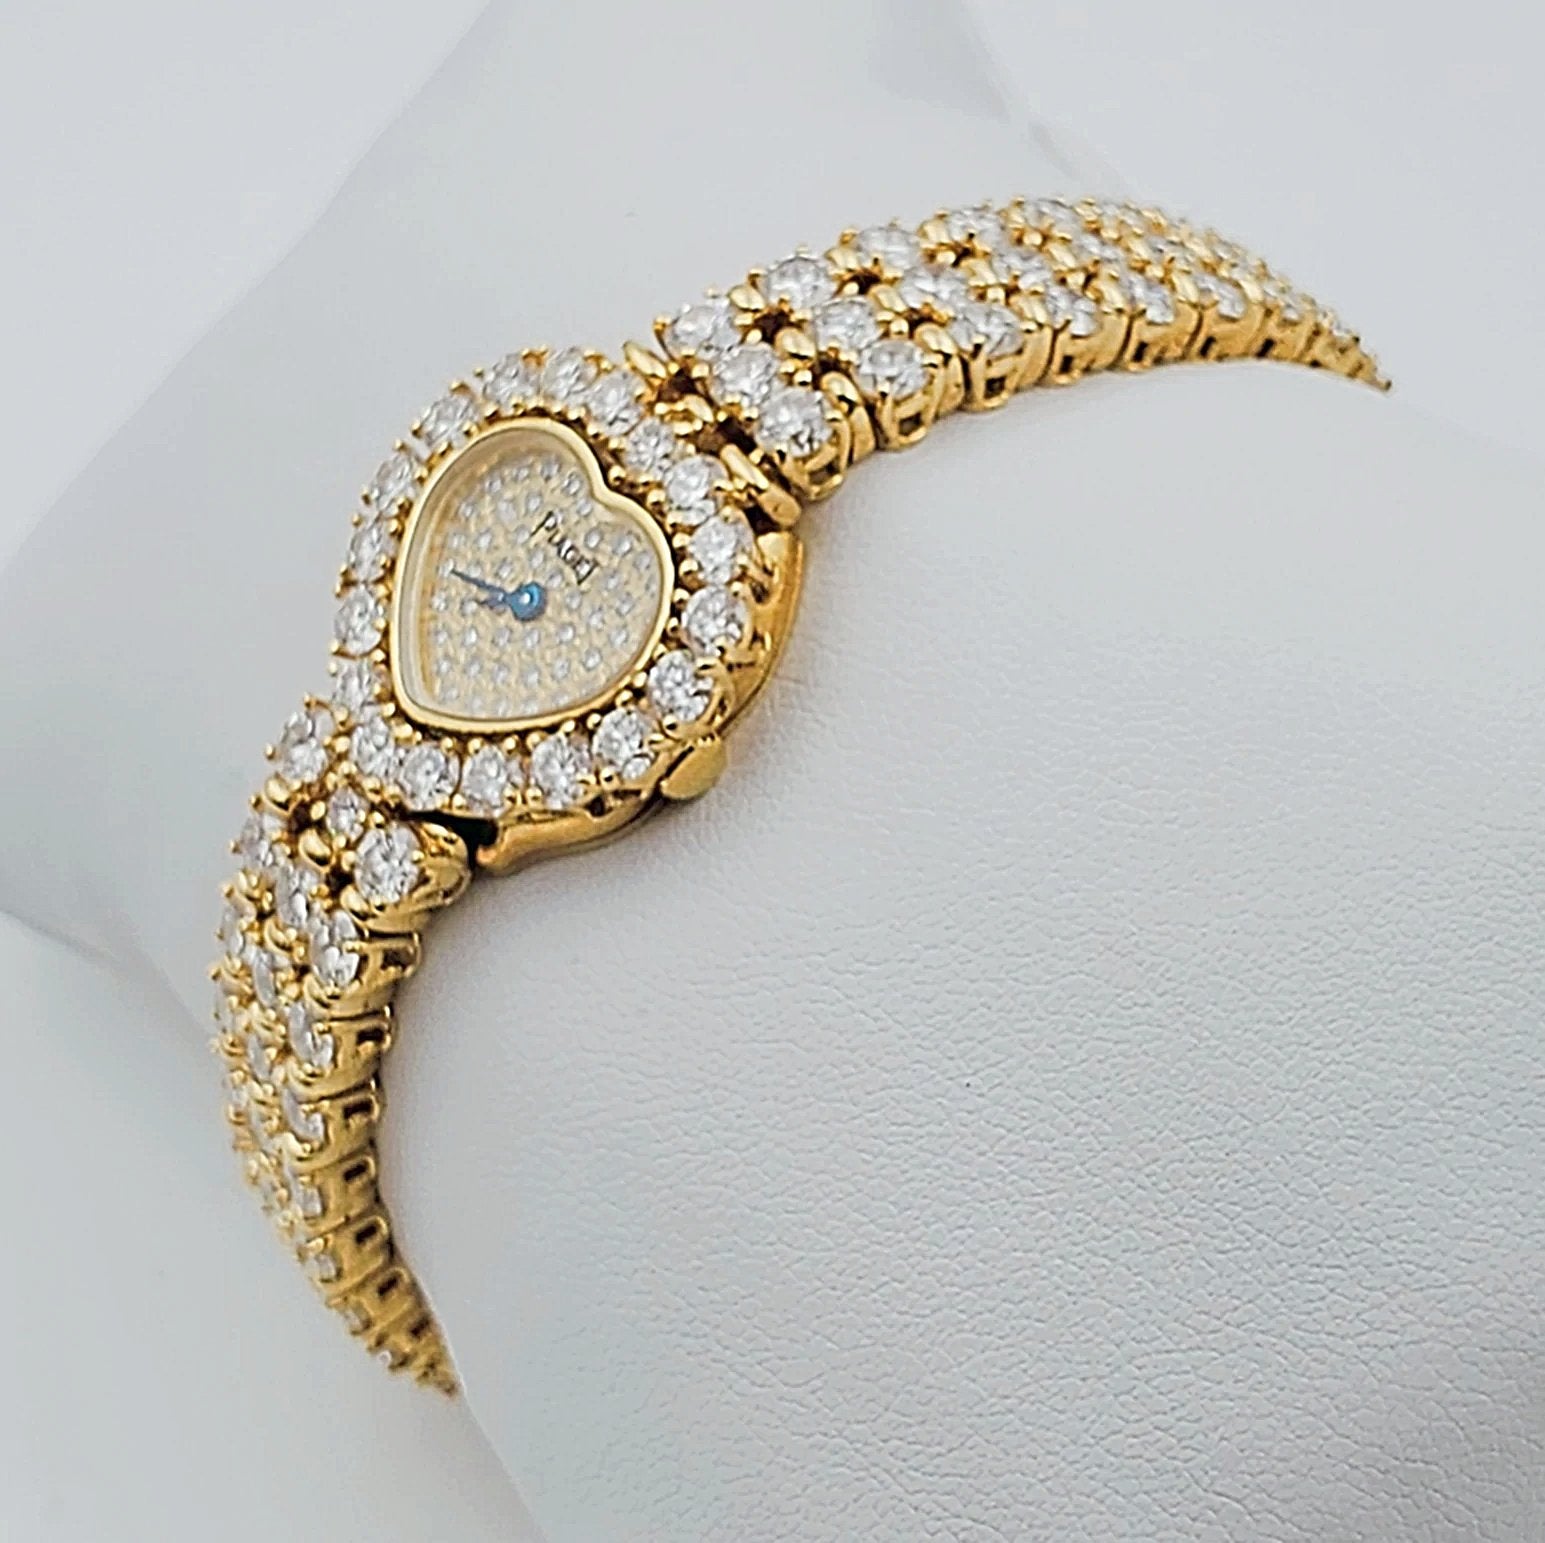 Women's Piaget Solid 18K Yellow Gold All Diamond 15CT VS1 F Color Bracelet Band Watch with Diamond Dial and Diamond Bezel. (Pre-Owned)